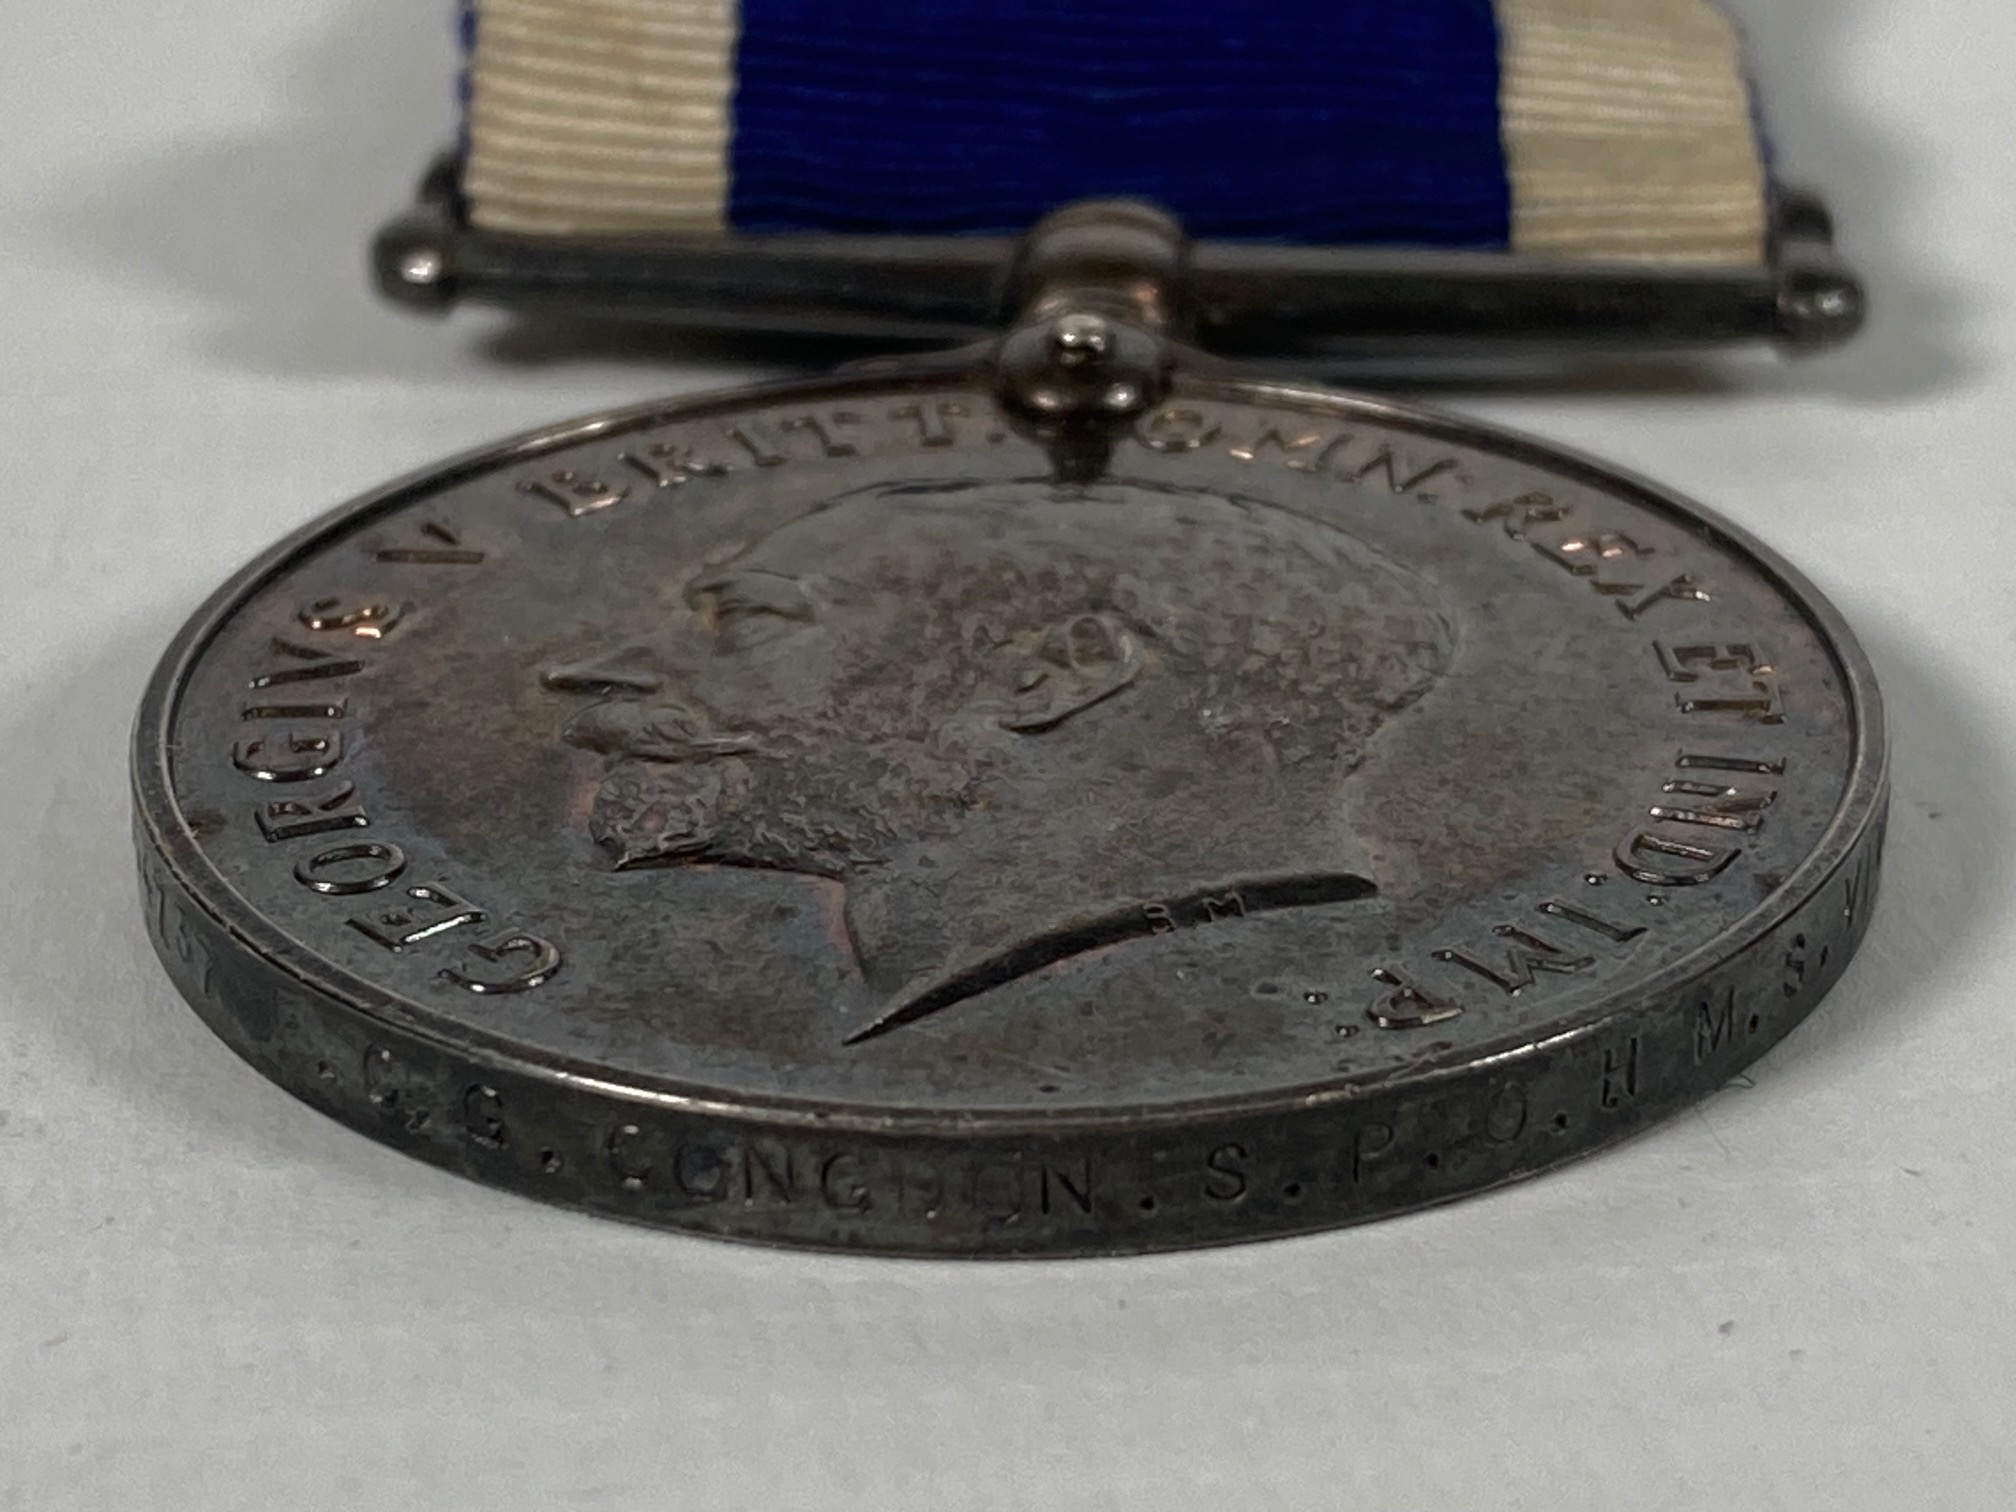 A George V long service & good conduct medal awarded to F.C.G Congdon S.P.O HMS Vivid - Image 4 of 5